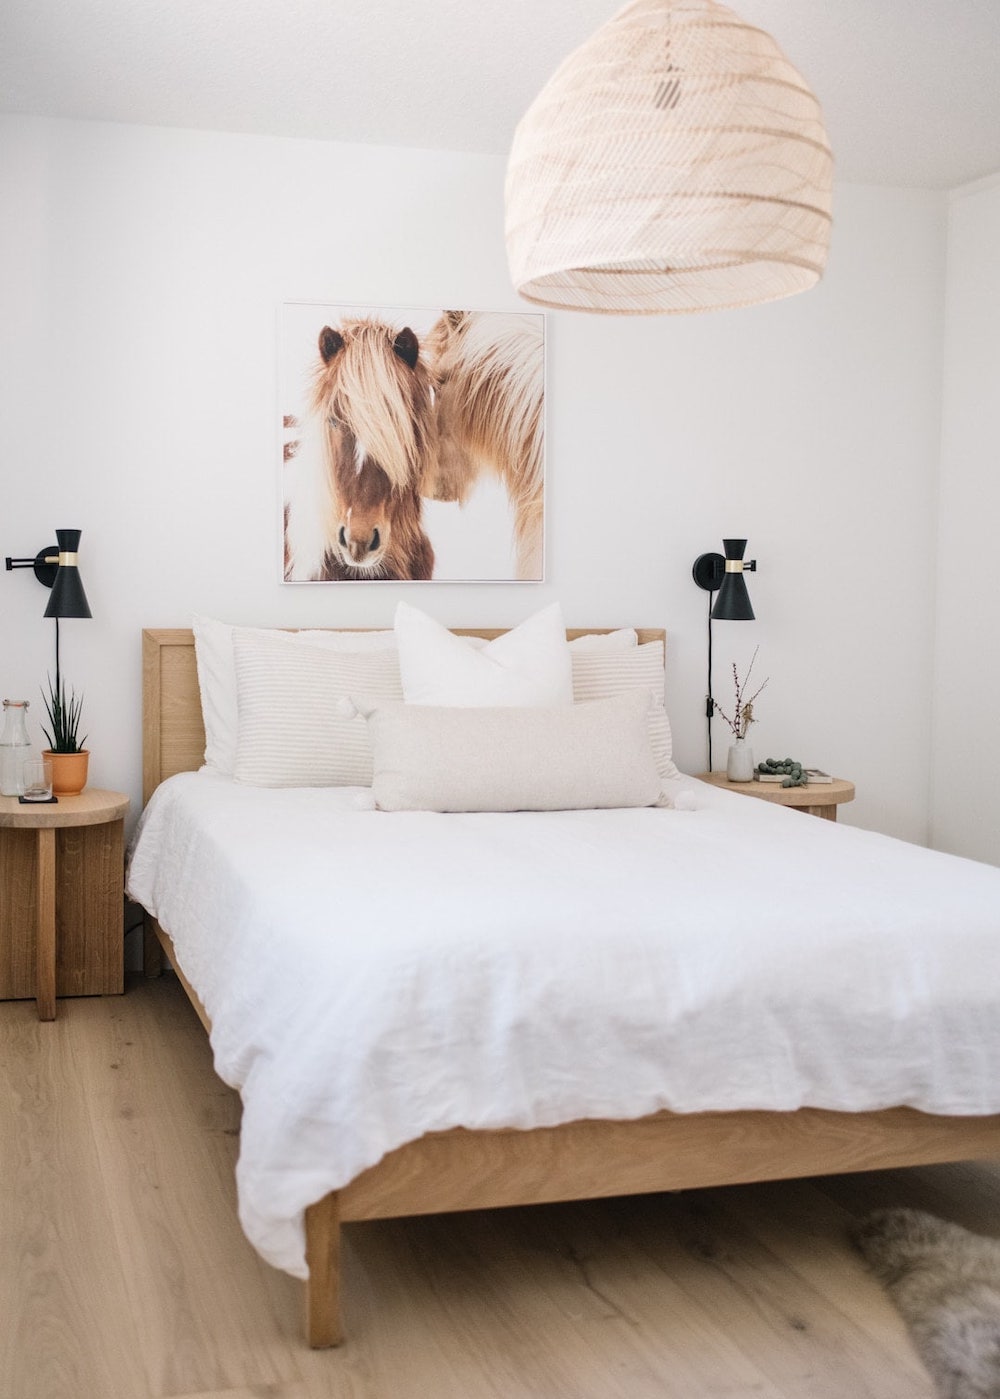 a white bedroom with animal art prints, rattan fixtures, and warm tones